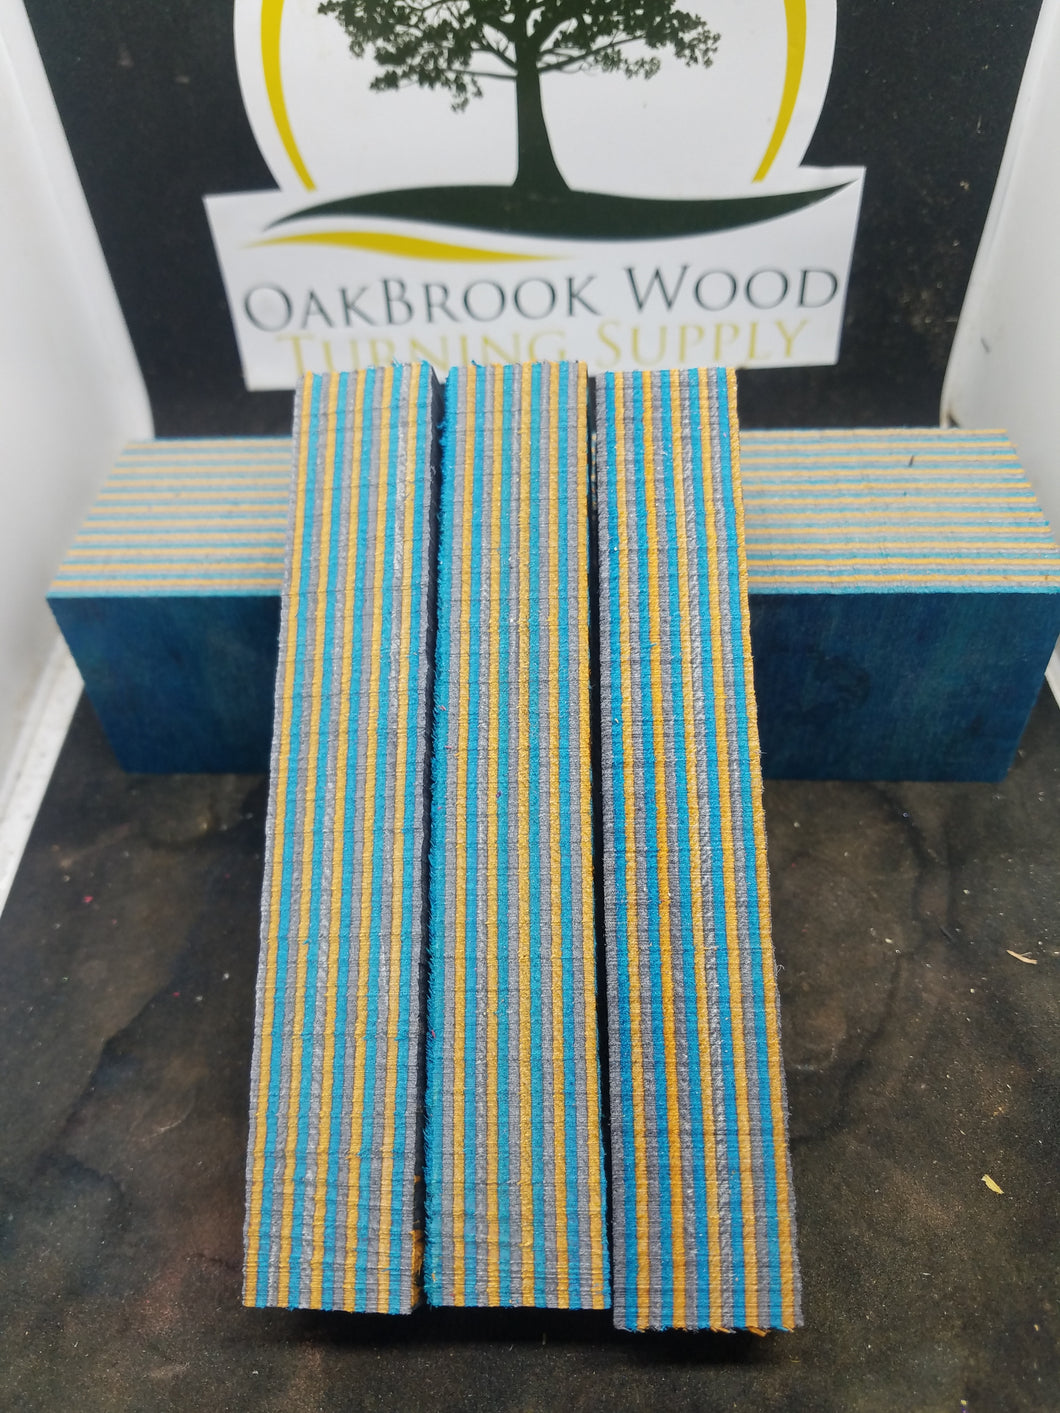 Spectraply Aqua Fire - Oakbrook Wood Turning Supply